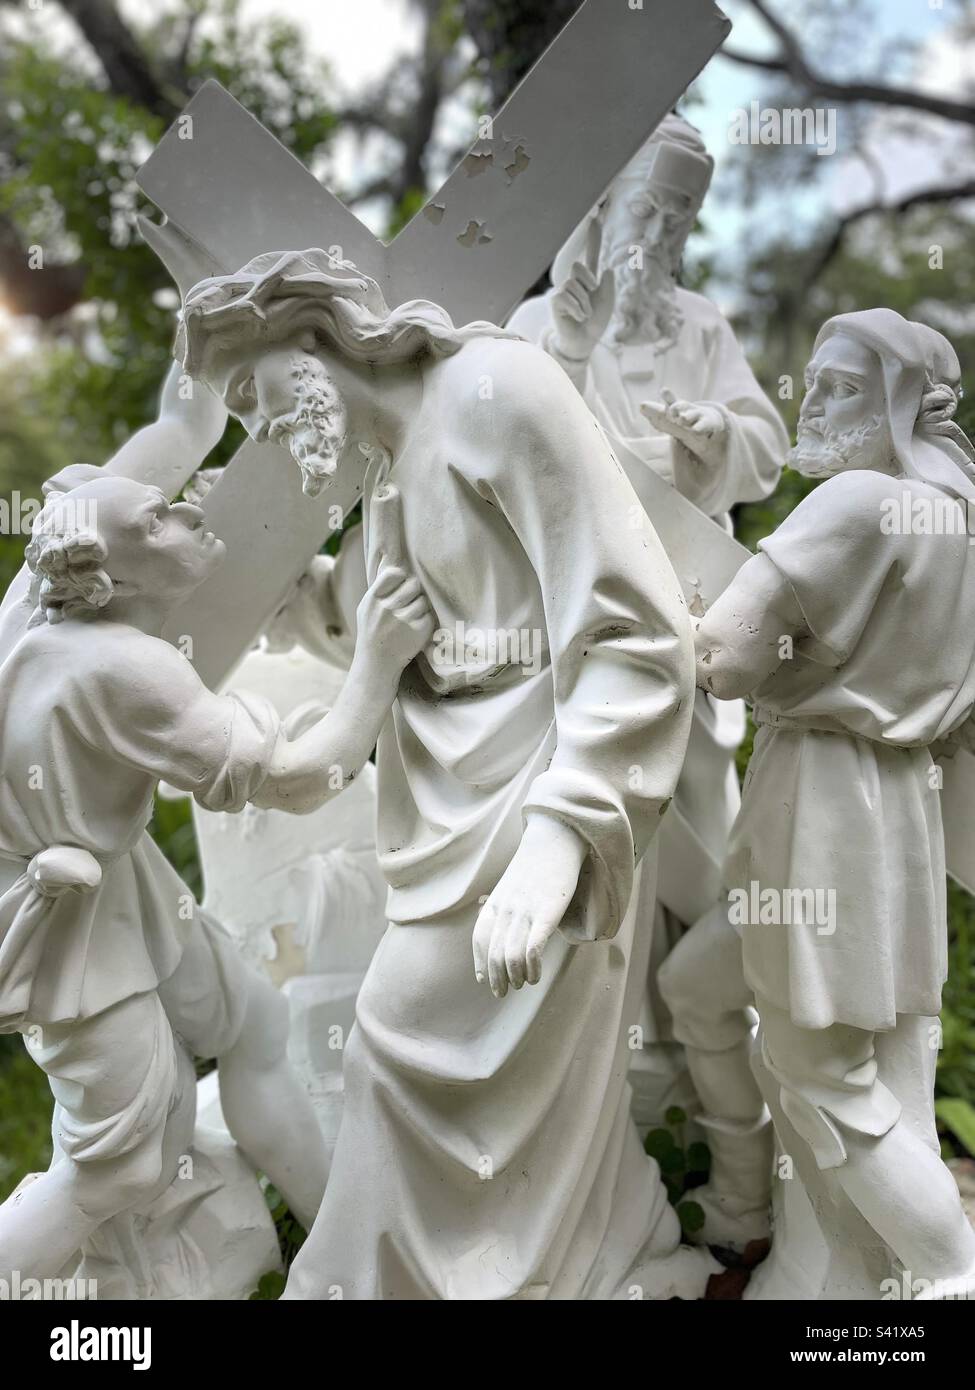 Portrait, Stations of the Cross, 2nd station, Jesus presented with Cross, eye to eye contact Jesus and guard, accusing official in background, white nearly life-size statues Stock Photo